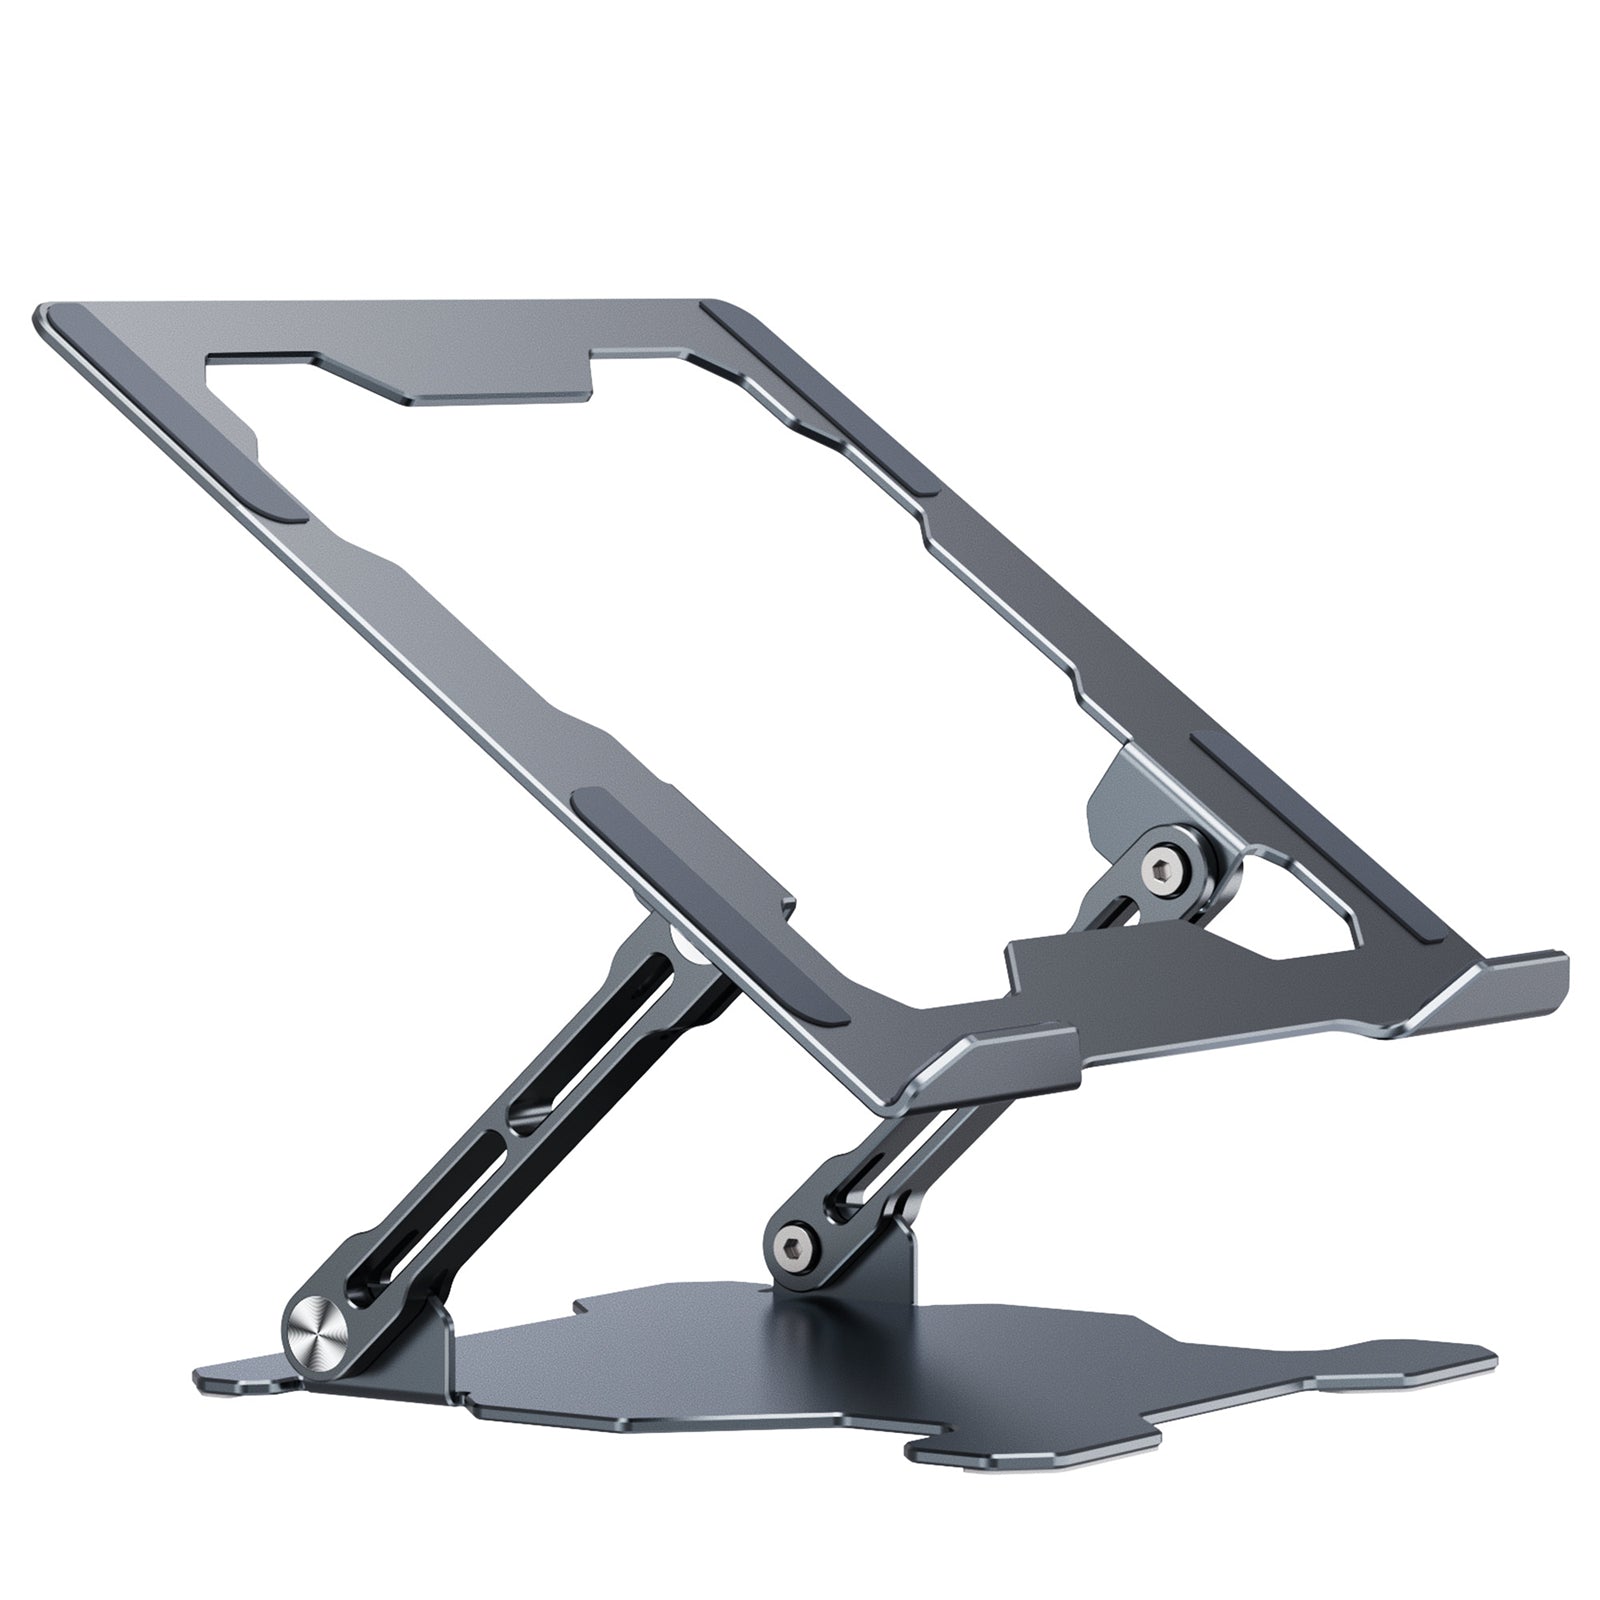 Elevate Your Laptop Experience with Our New Laptop Stand!